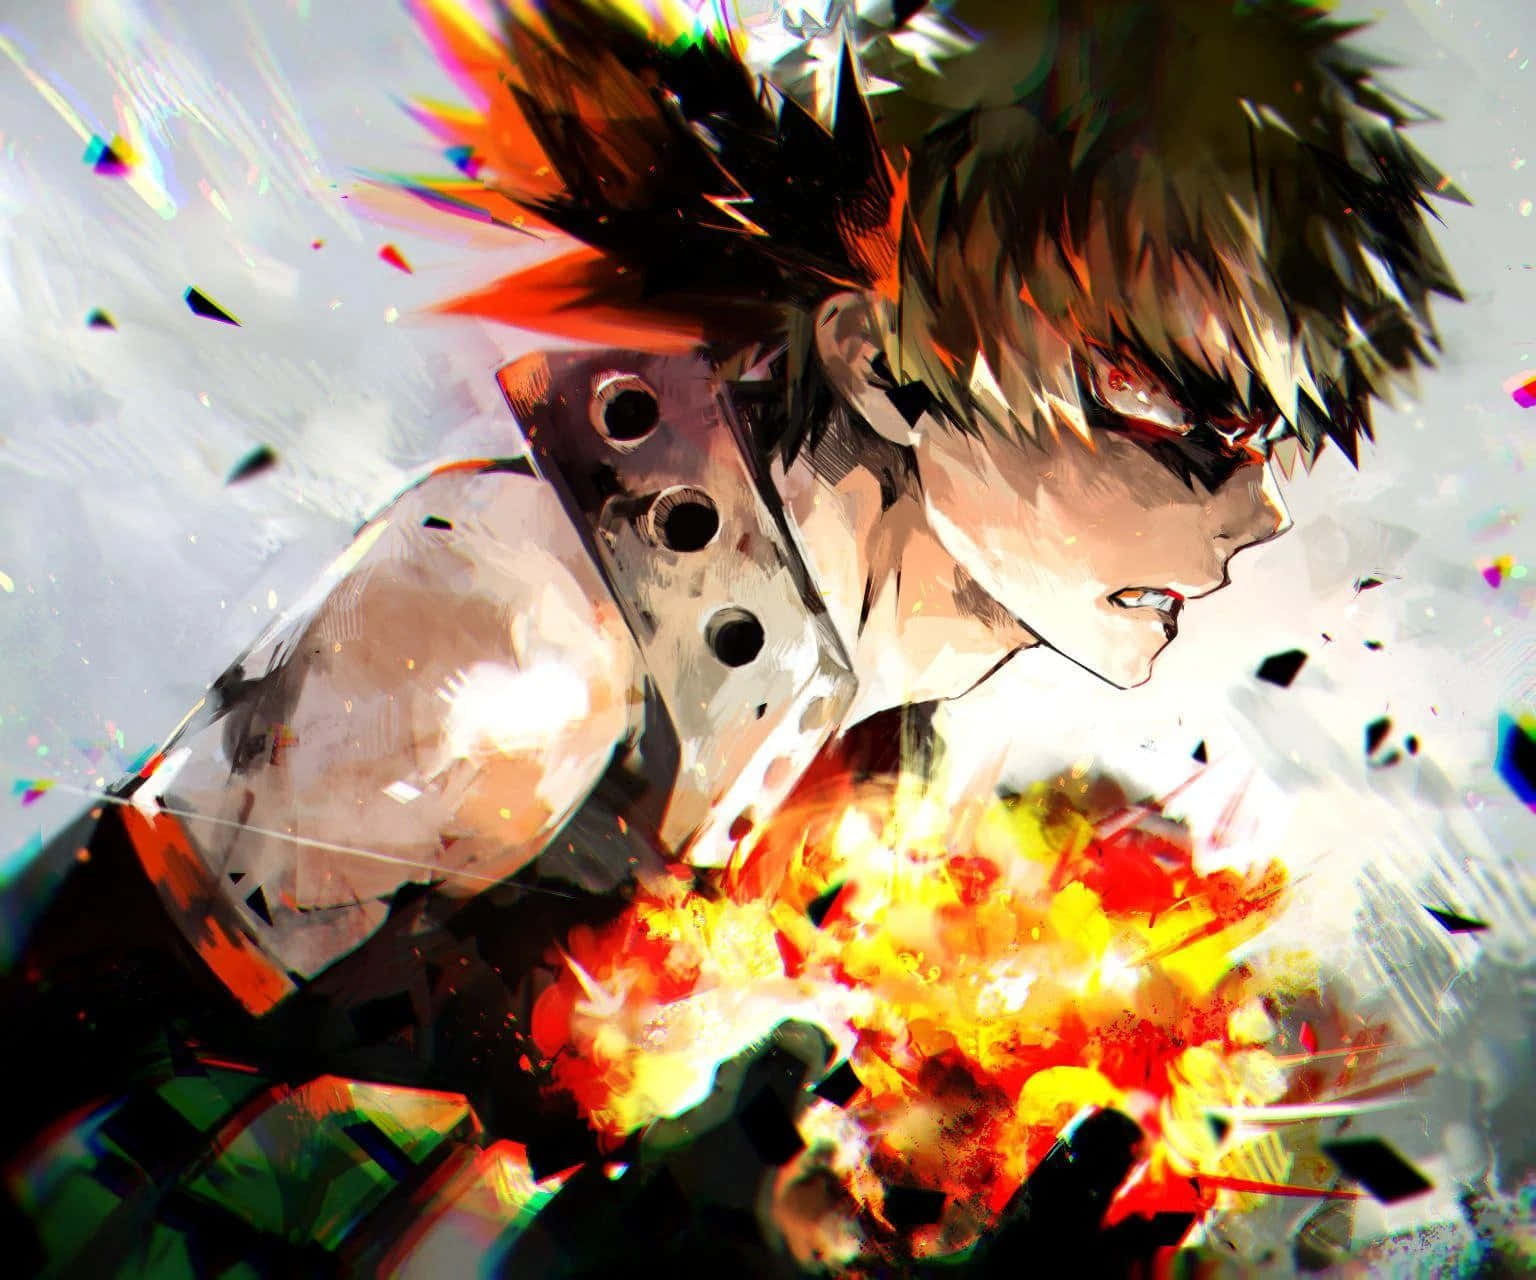 "Katsuki Bakugou is a powerful force to be reckoned with!"